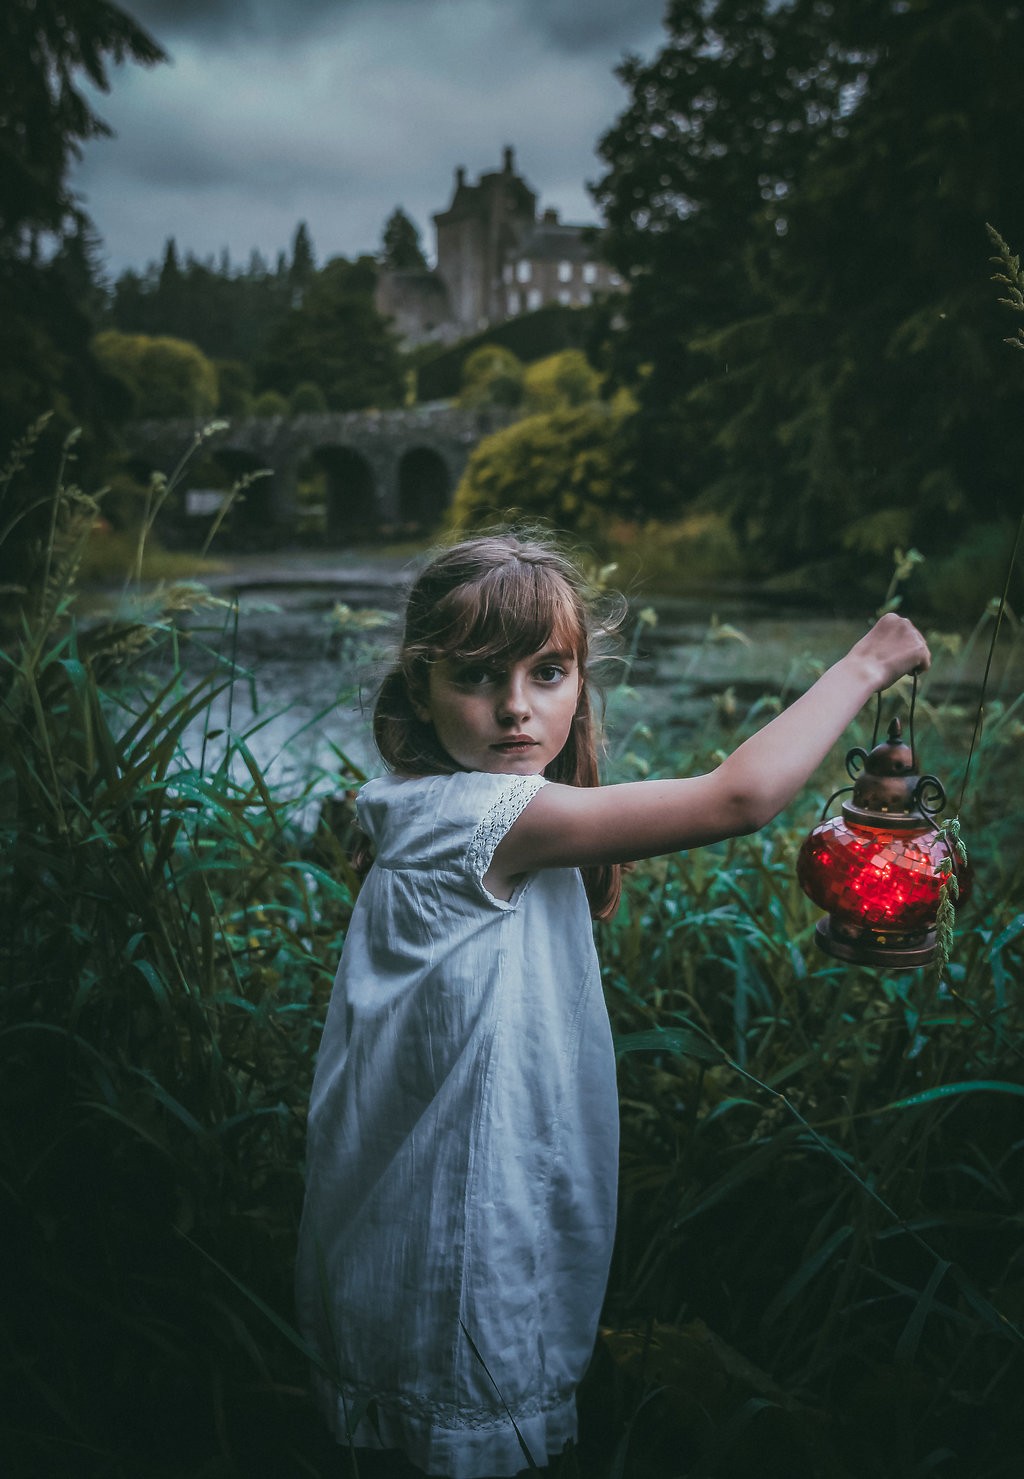 A young girl with an enchanted look in her eyes on the grounds of Drummond Castle in Perthshire.